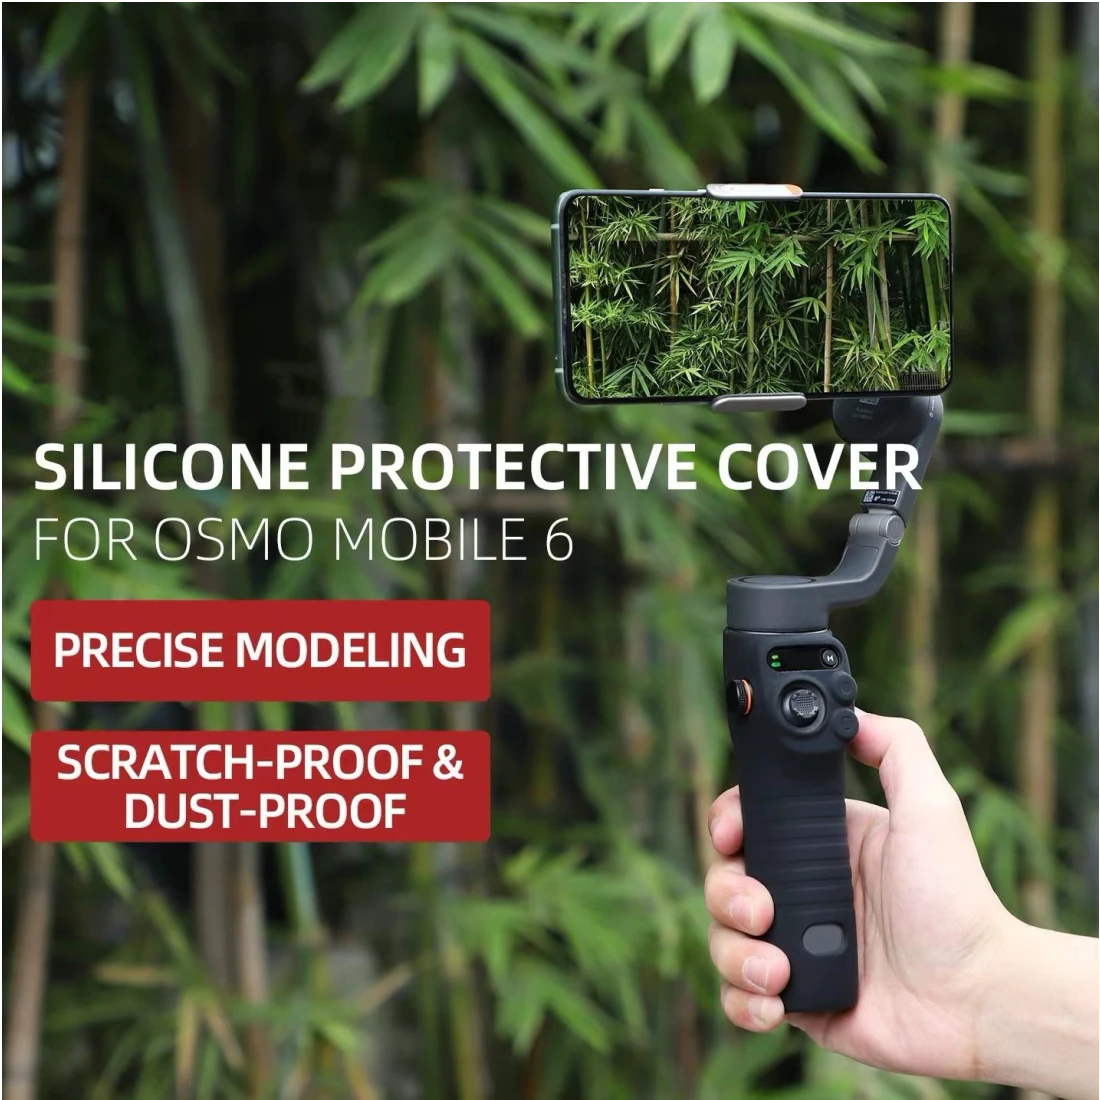 For DJI Osmo Mobile 6 Silicone Cover Soft Handle Protector Scratch-resistant and Easy to Clean For DJI OM 6 Gimbal Accessories